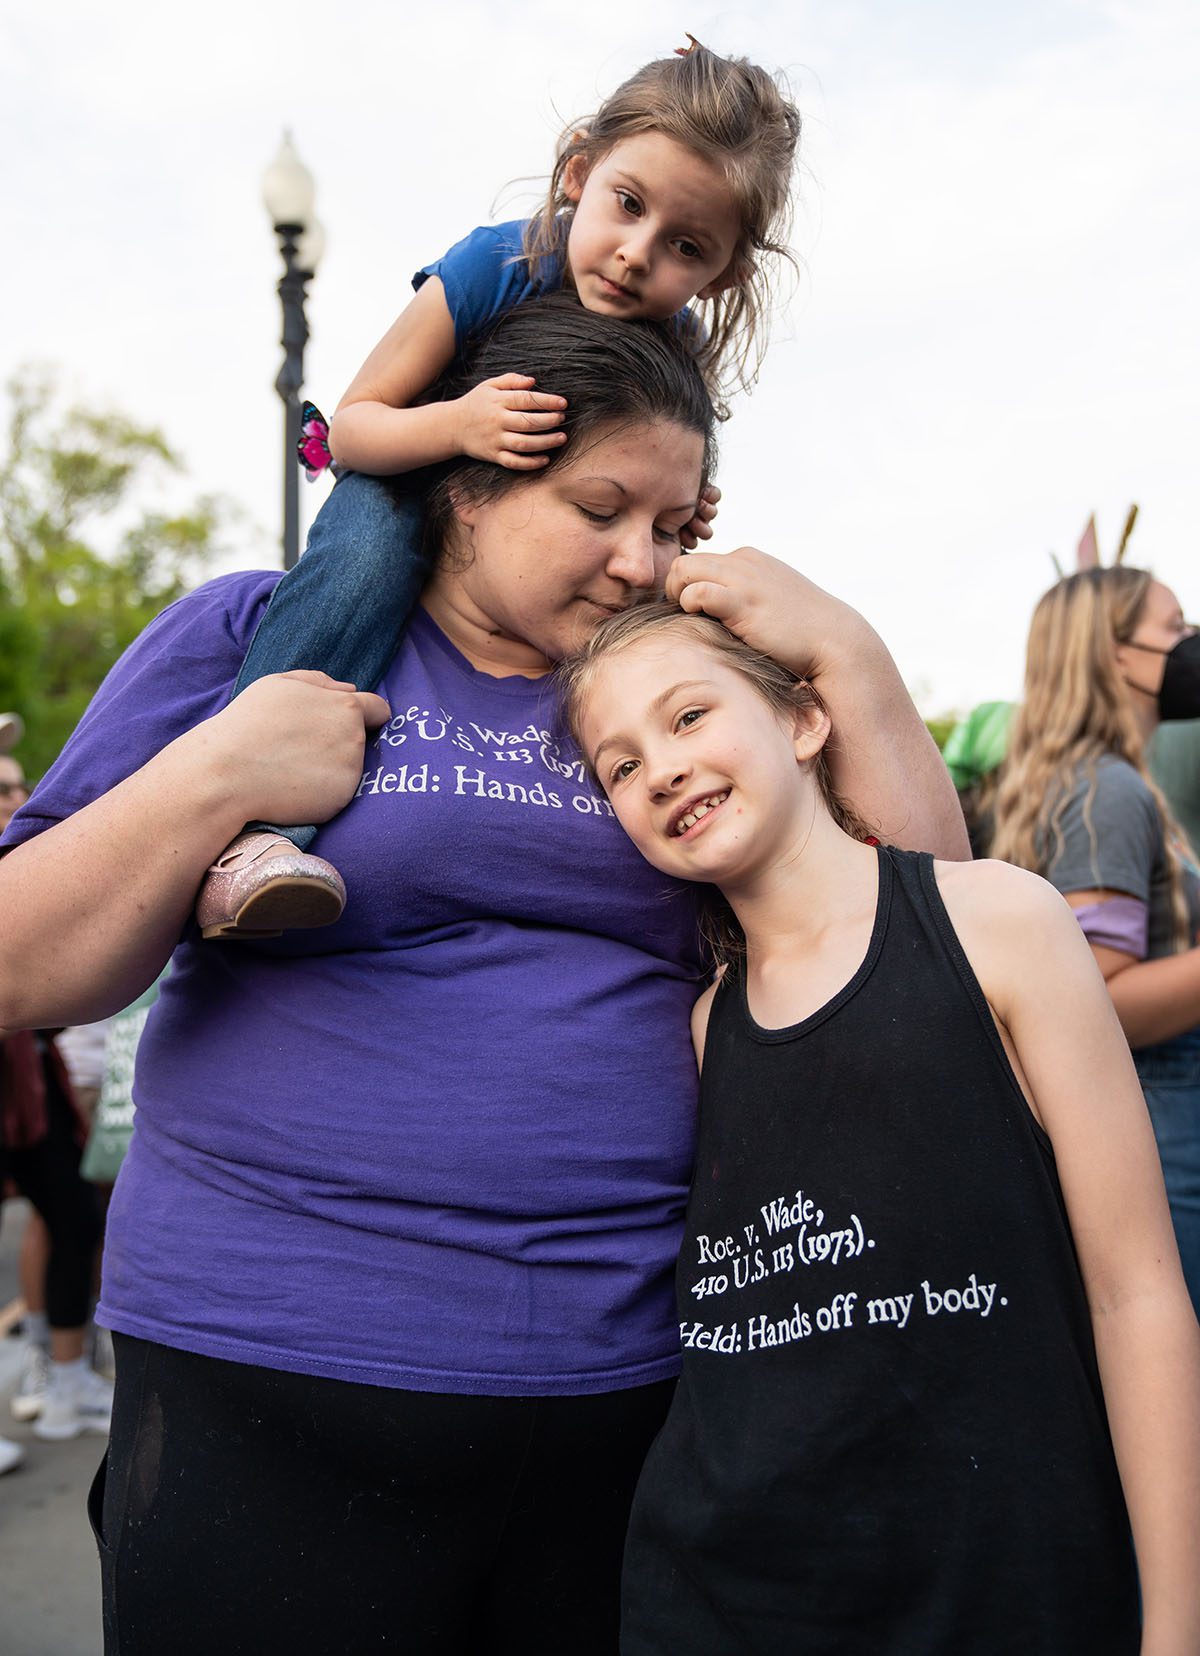 A mother hugs her daughter while holding the other on her shoulders. Mom and oldest daughter wear shirts that read "Roe v. Wade, 410 U.S. 113 (1973) Held: Hands off my body."